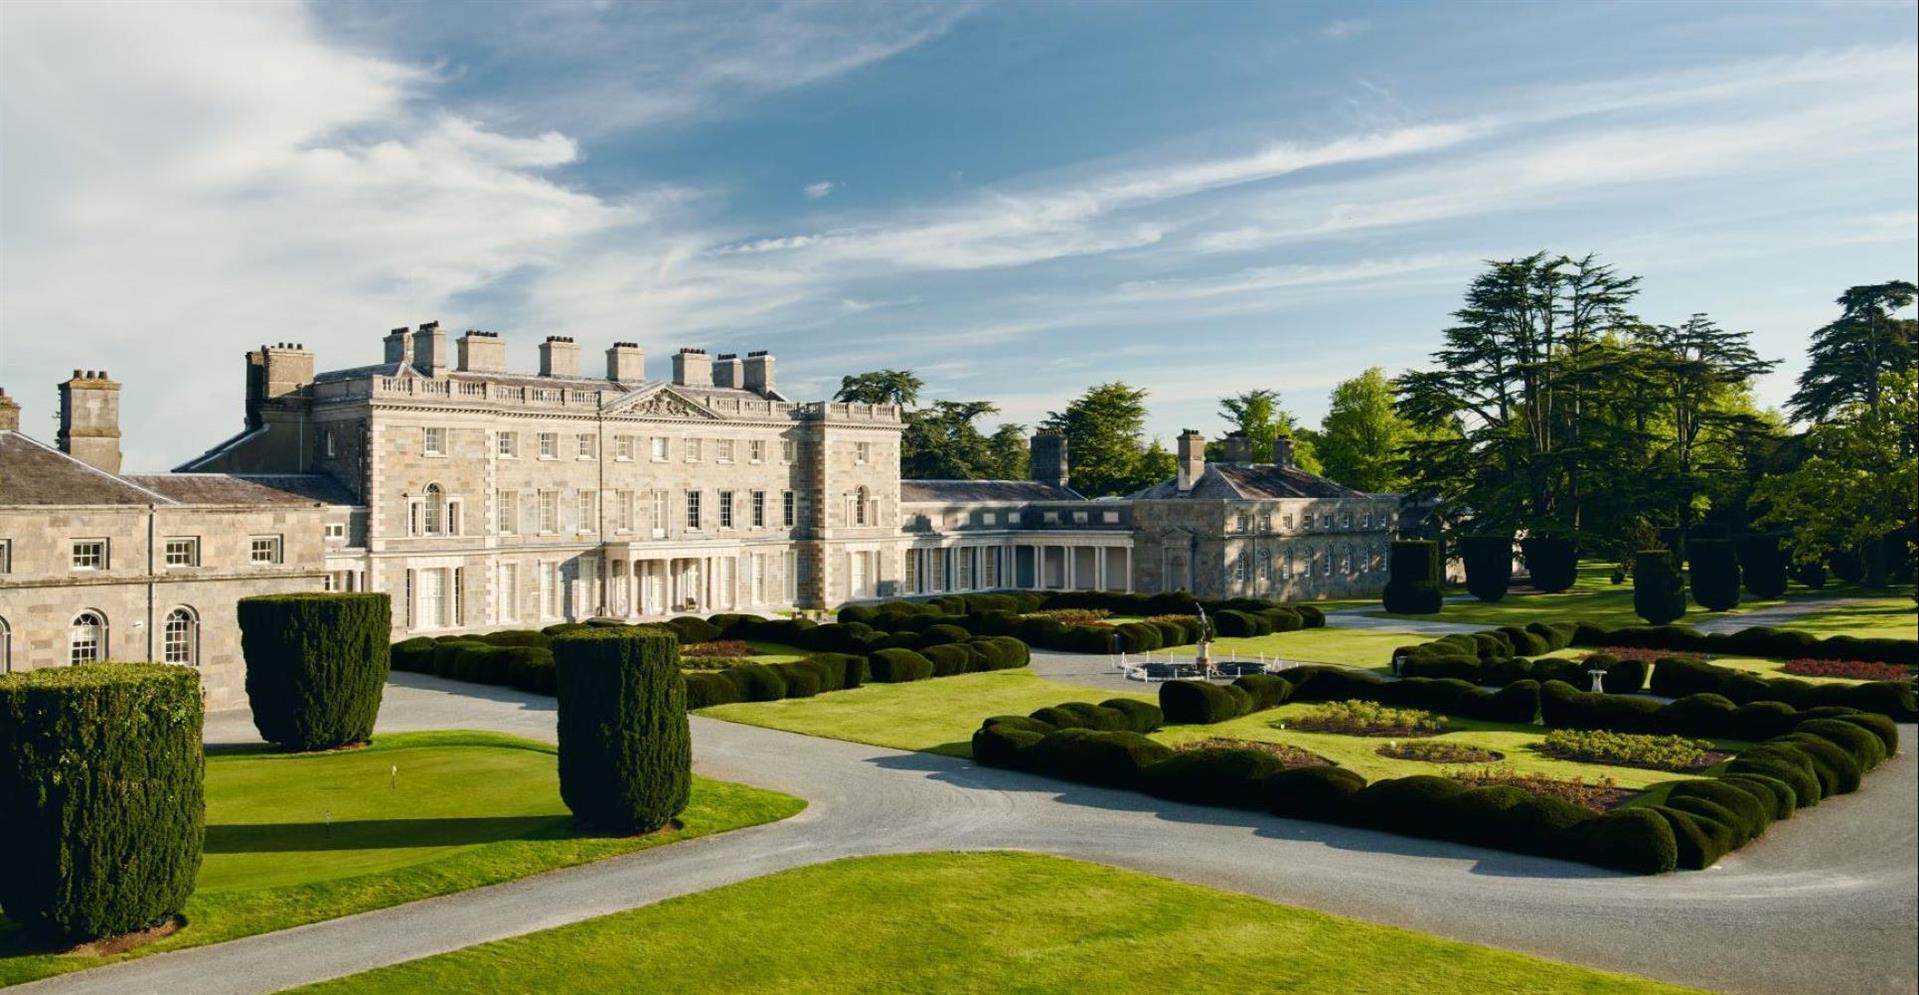 Carton House a Fairmont Managed Hotel in Maynooth, IE